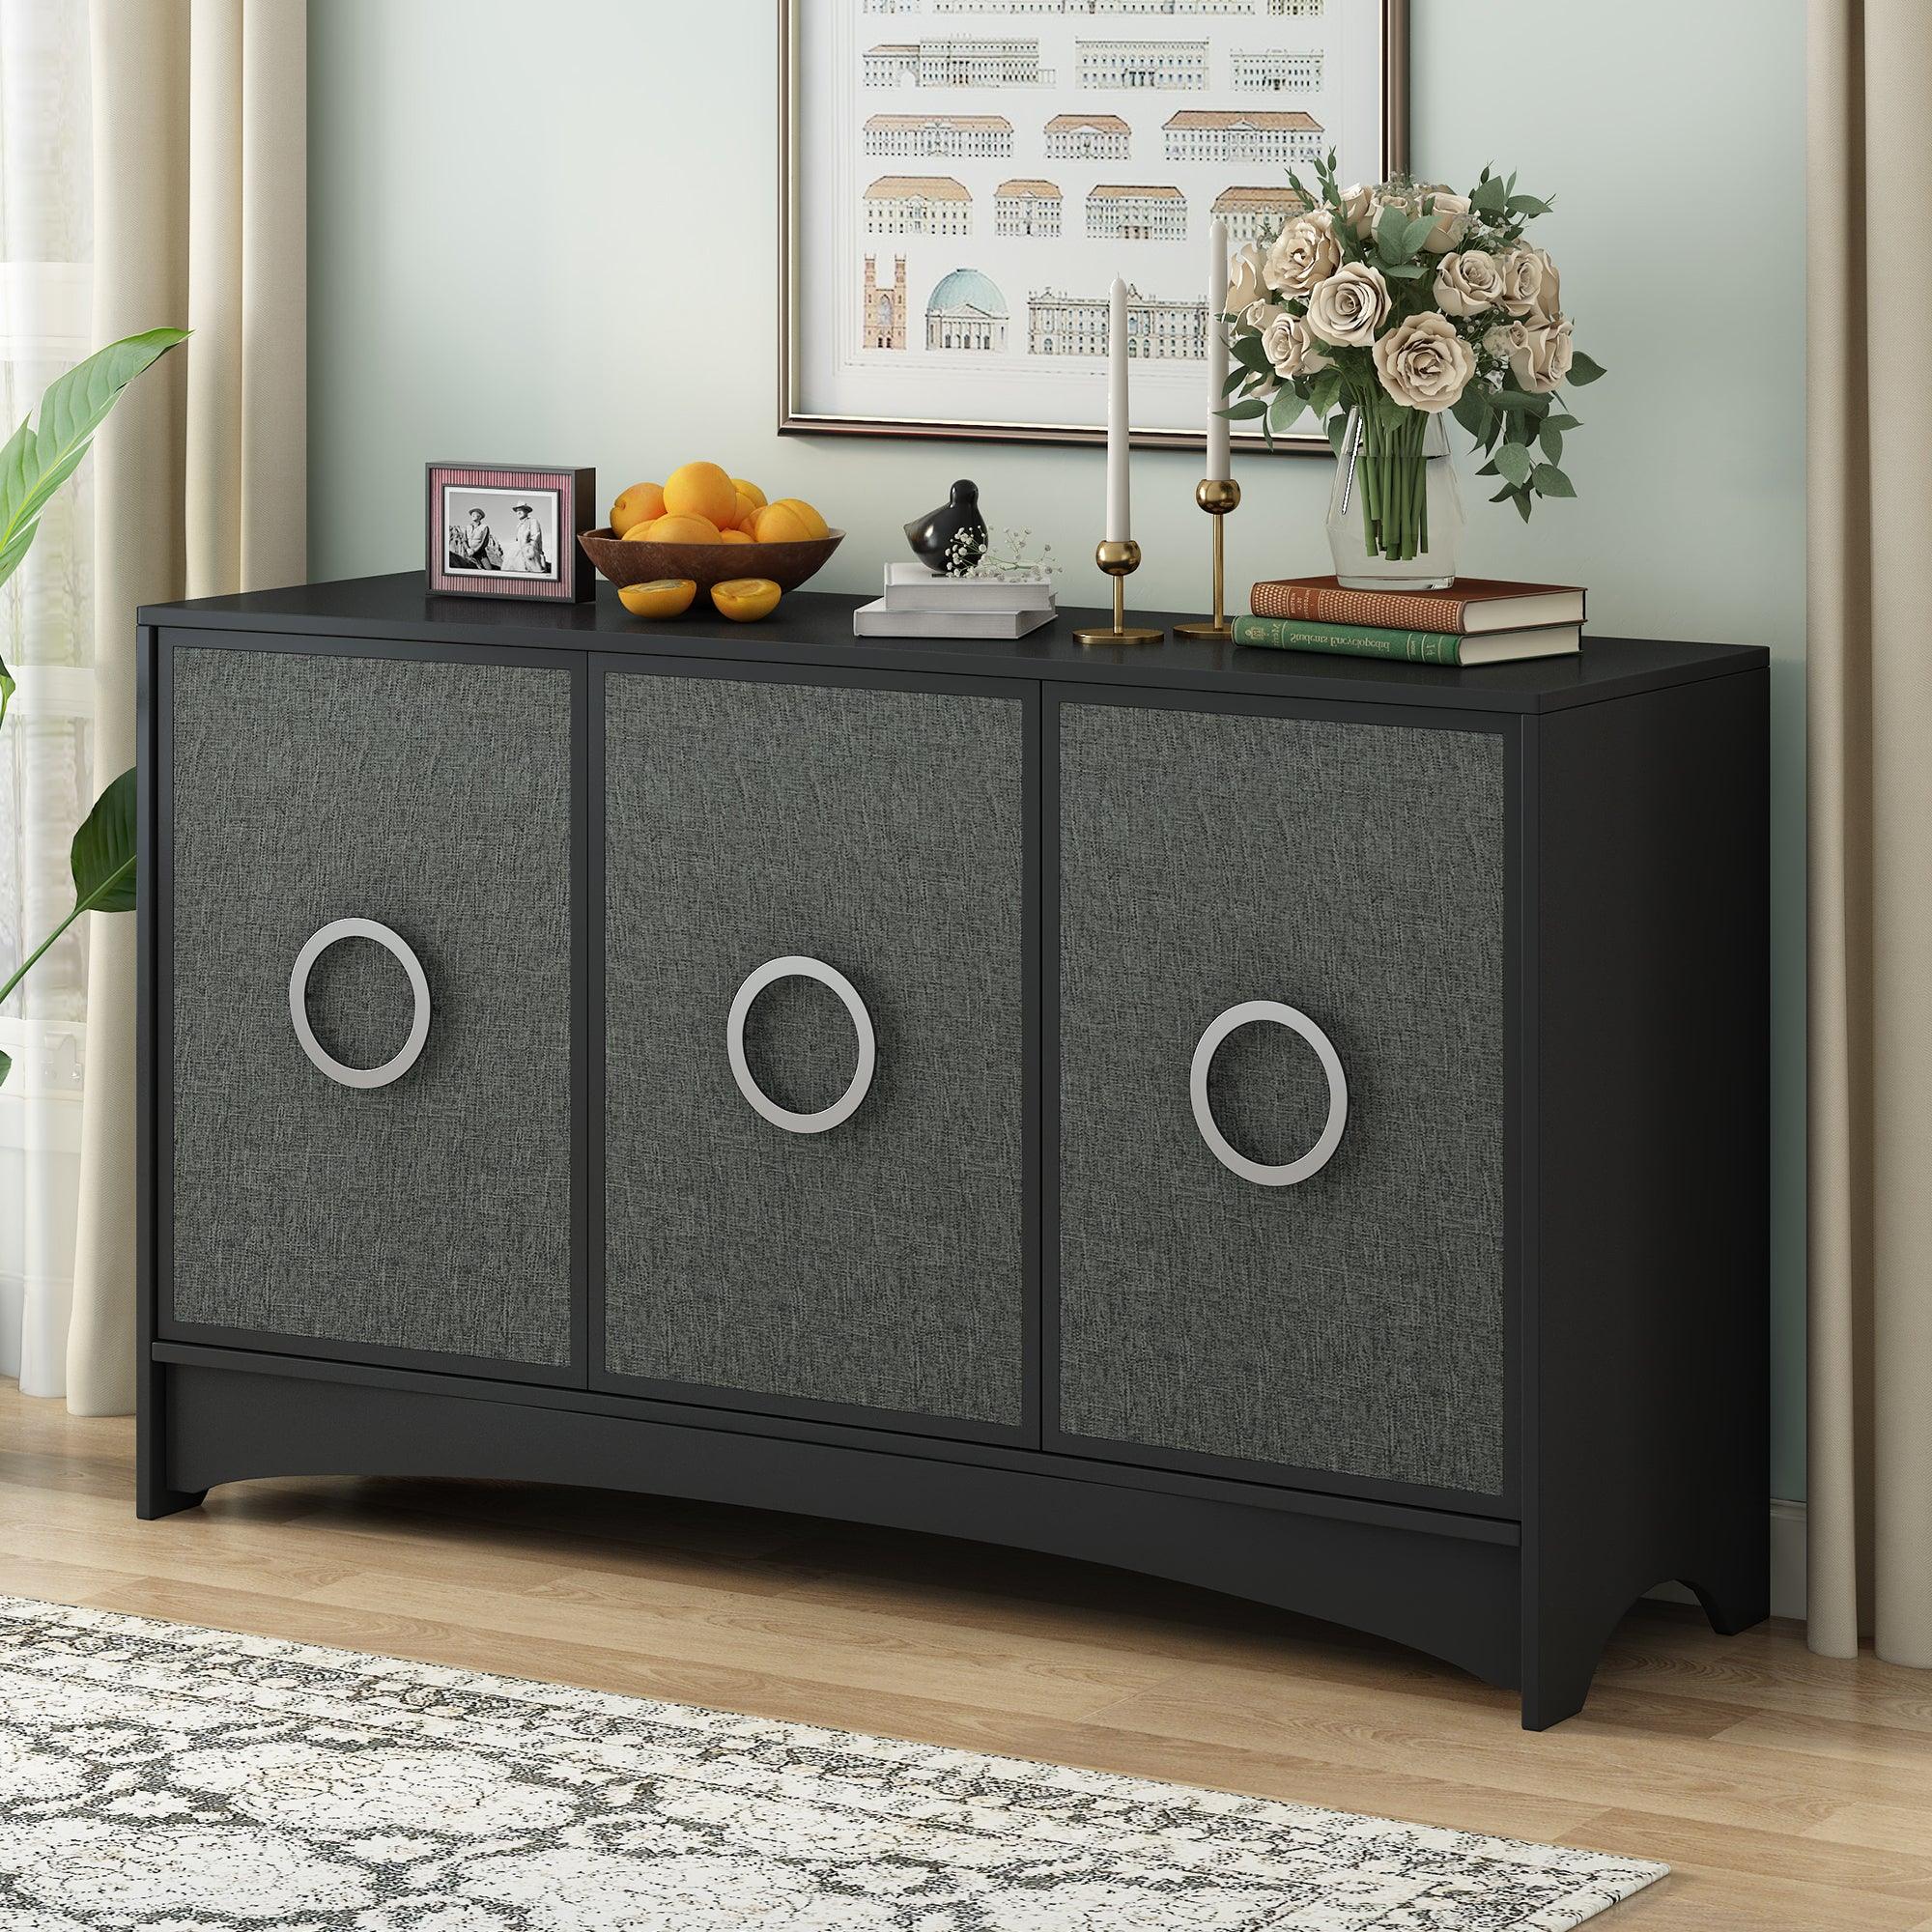 🆓🚛 Curved Design Storage Cabinet With Three Doors & Adjustable Shelves, Suitable for Corridors, Entrances, Living Rooms, & Study